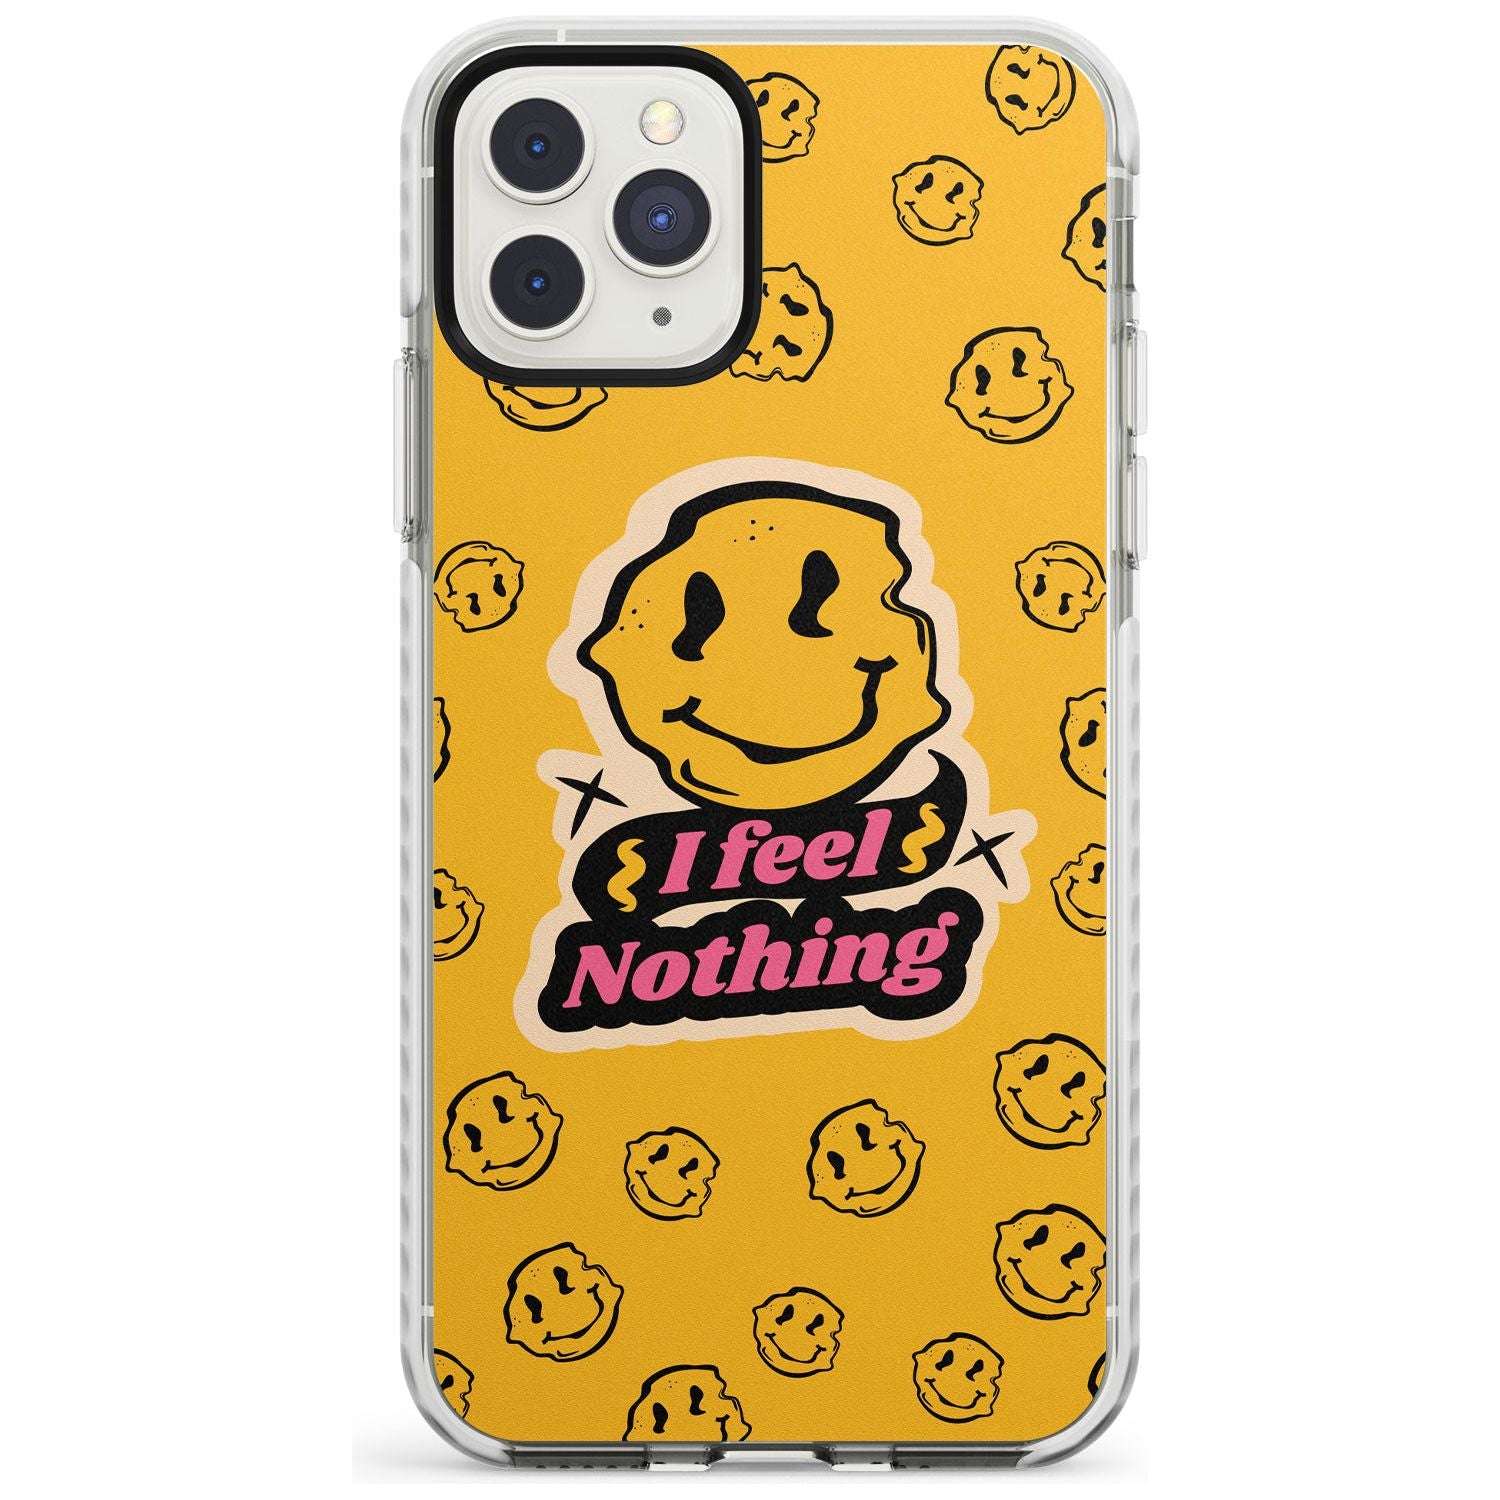 I feel nothing Impact Phone Case for iPhone 11 Pro Max